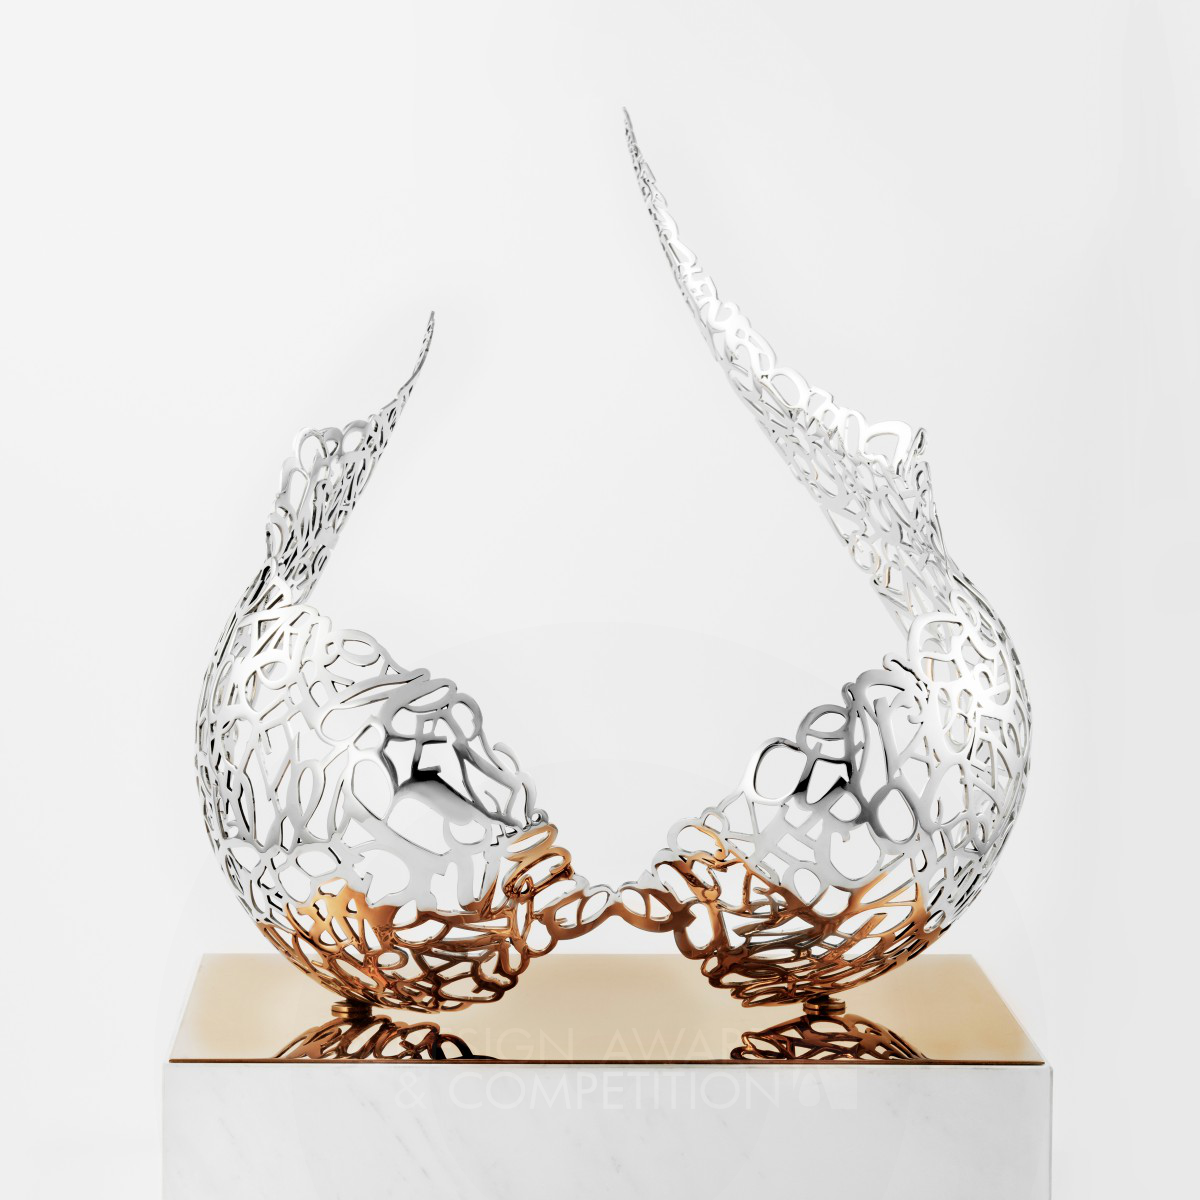 The Wings: A Sculpture of Freedom and Elegance